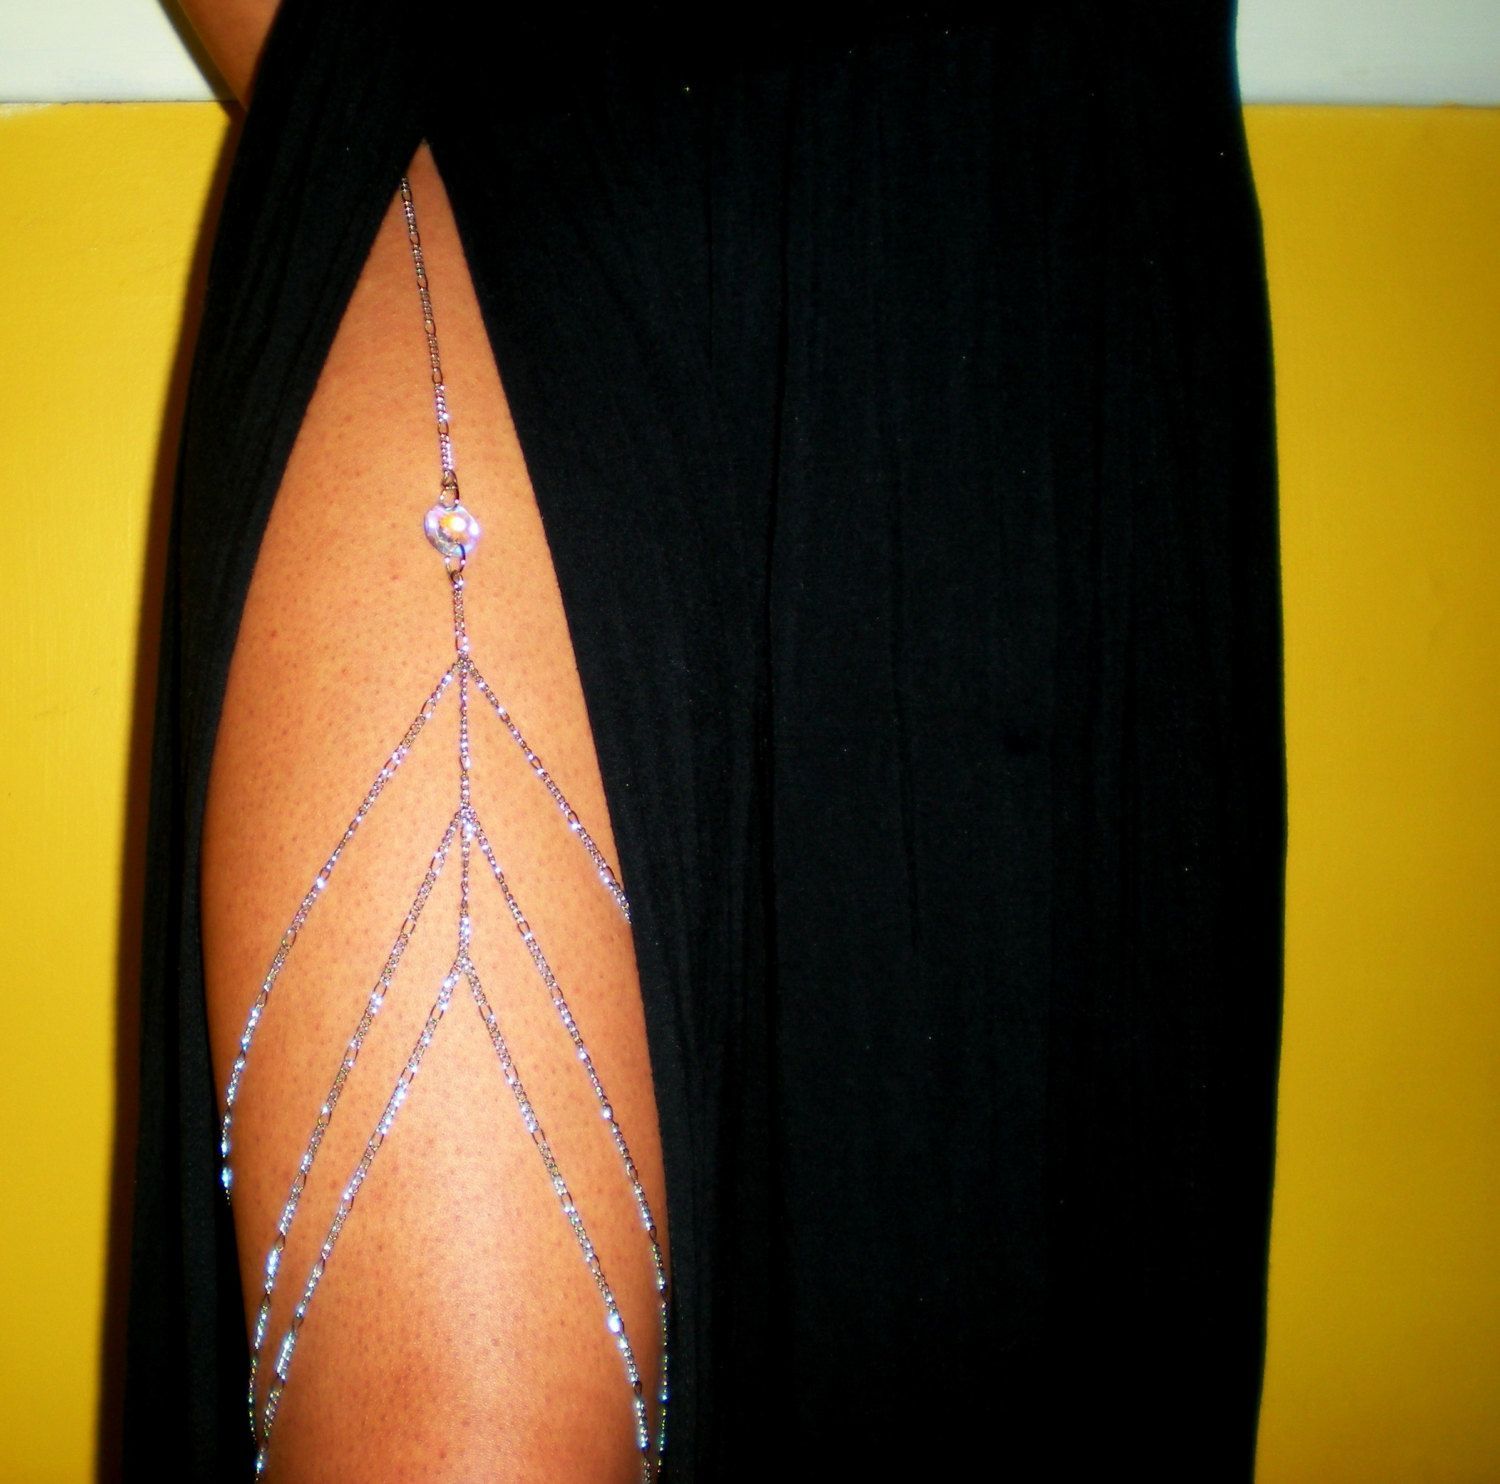 Thigh Chain Leg Jewelry/ Body Jewelry. Silver or by WildHeartCo,